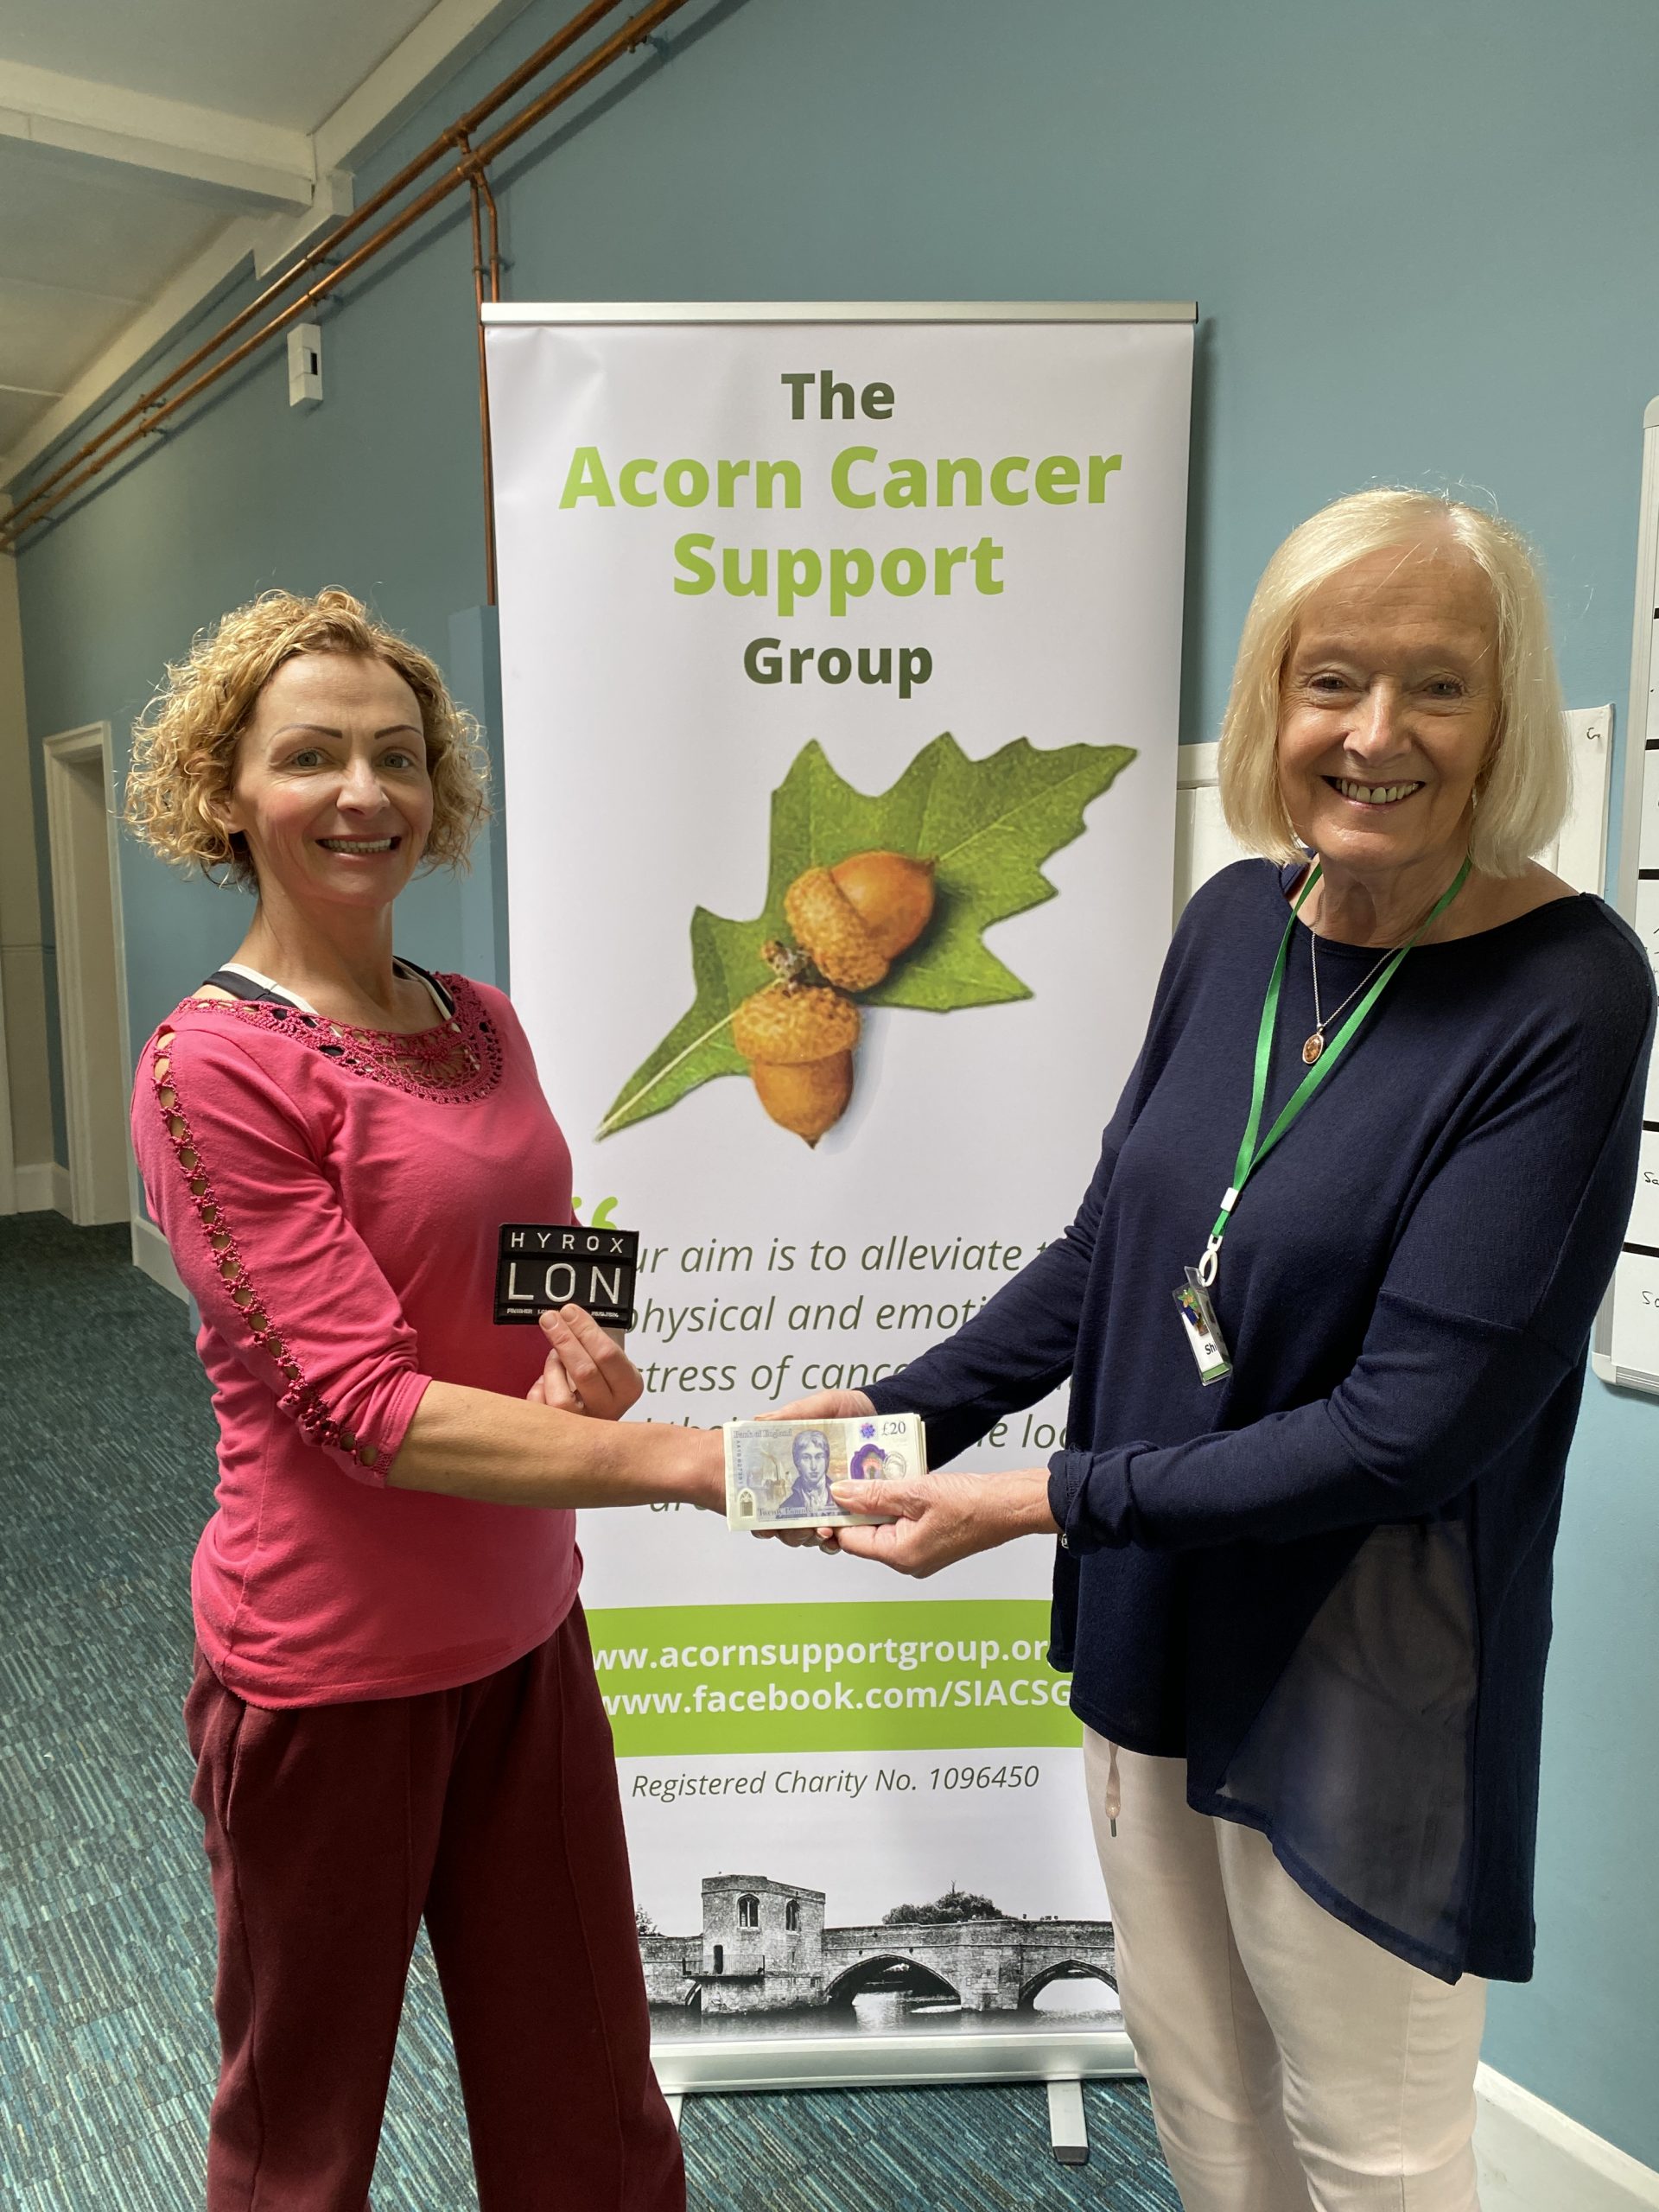 Beccy goes that extra kilometer for The Acorn Cancer Support Group!